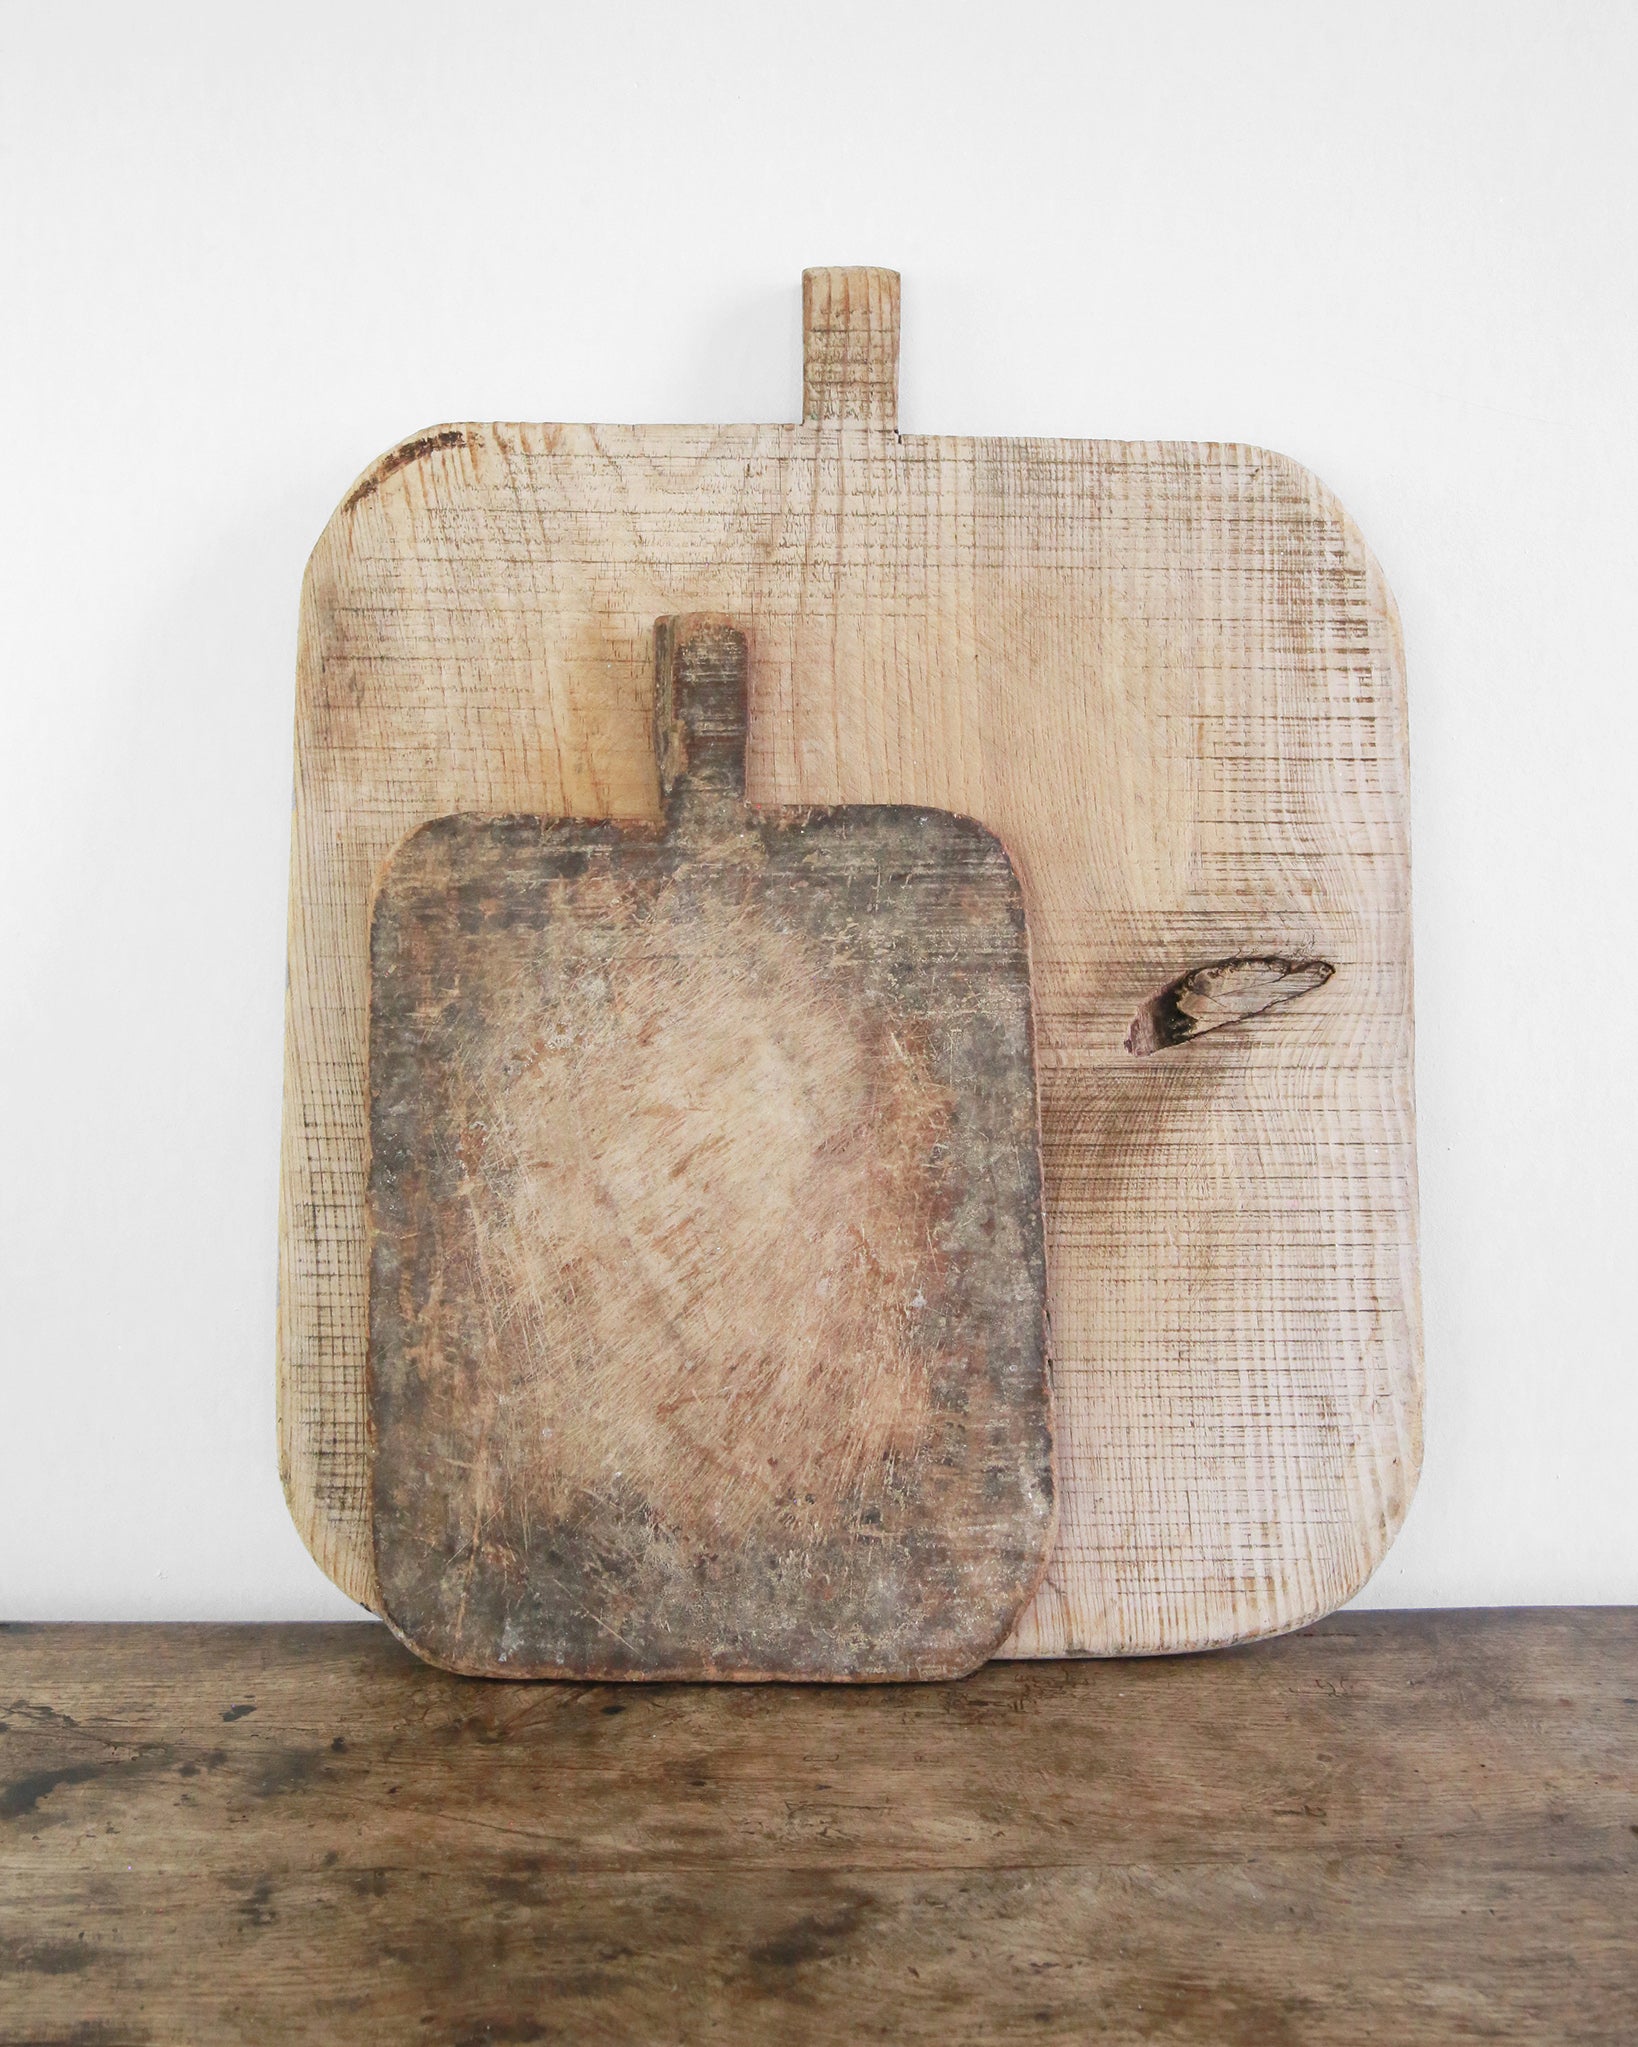 Rustic wooden chopping boards